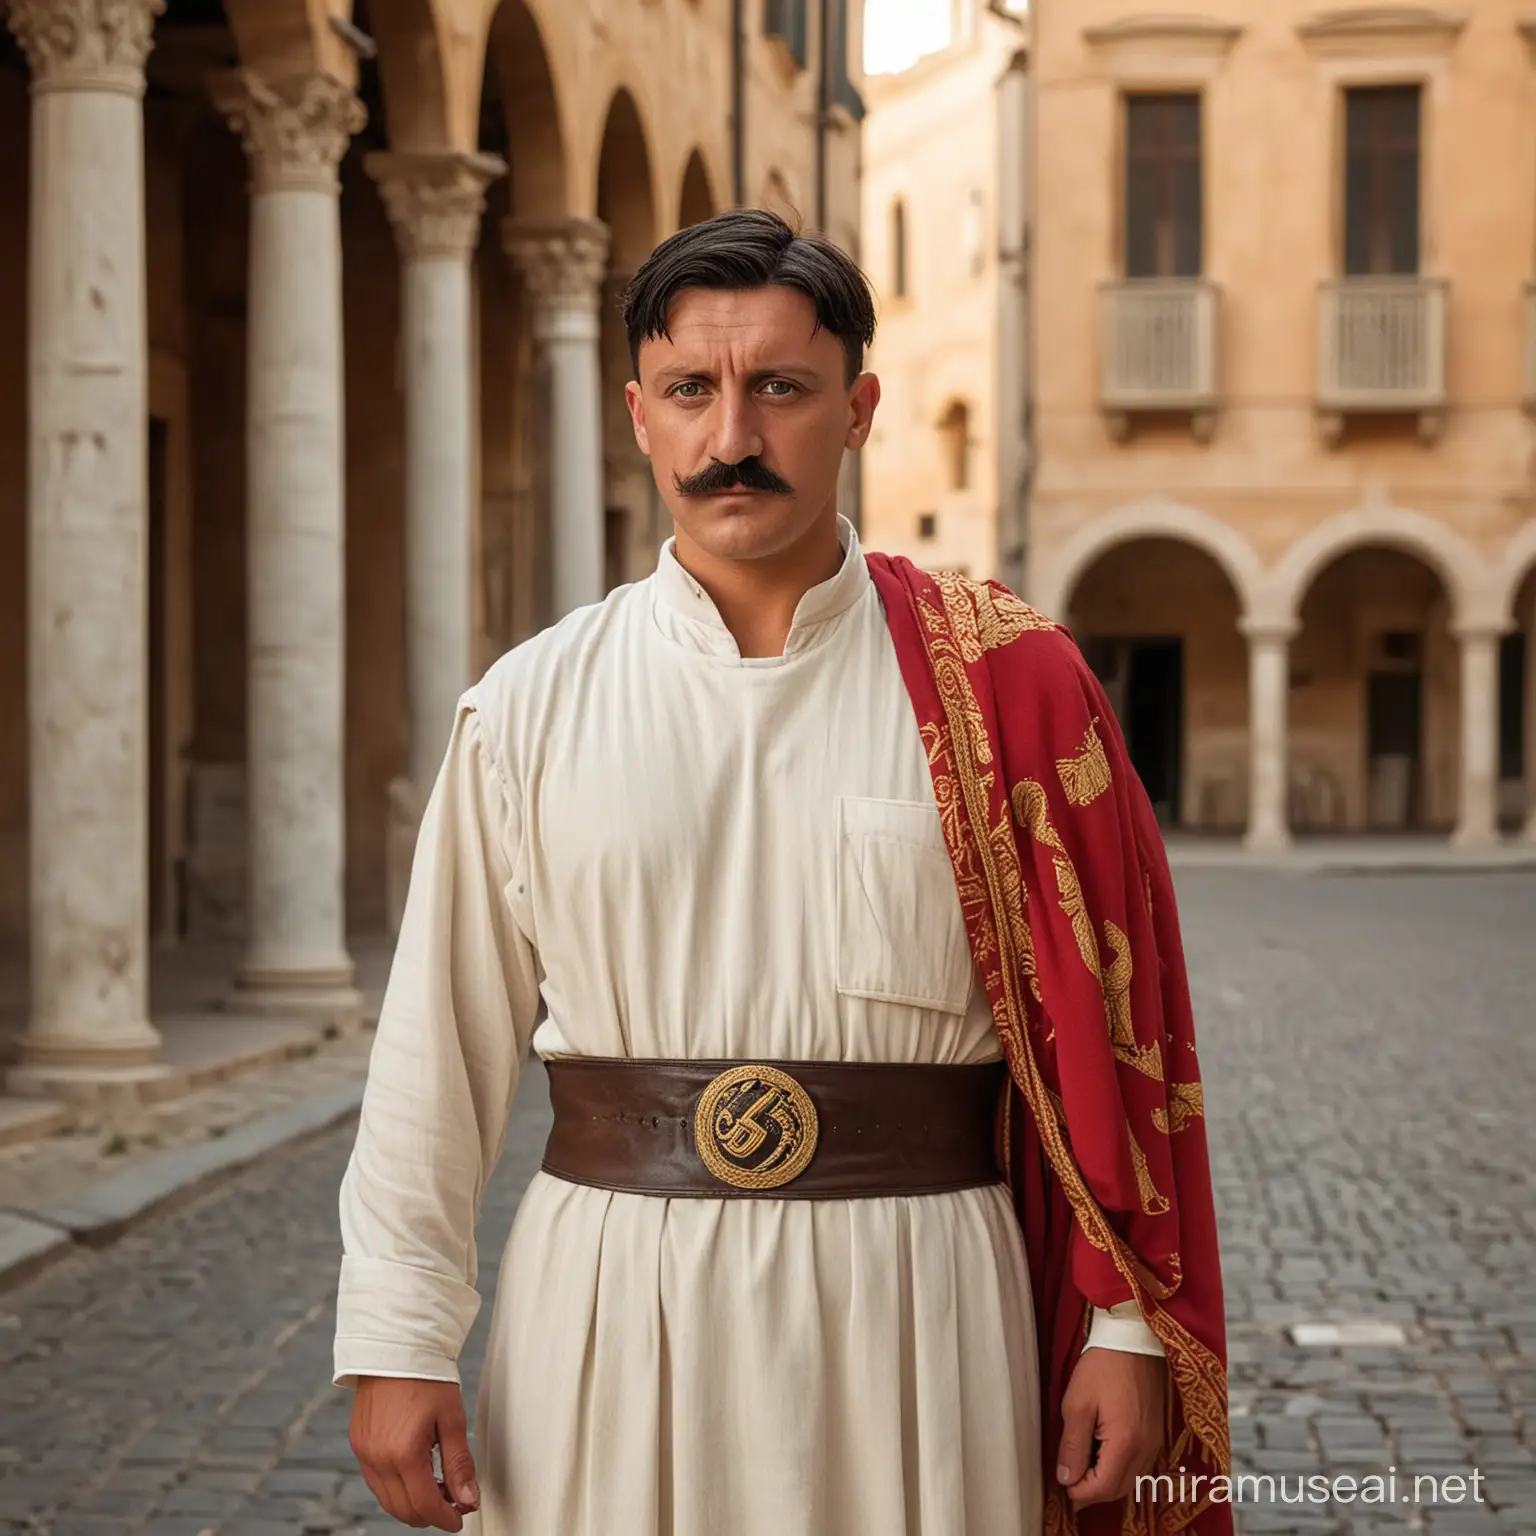 Medieval Southern Man Advertising Senate Election Campaign in Vibrant Mediterranean City